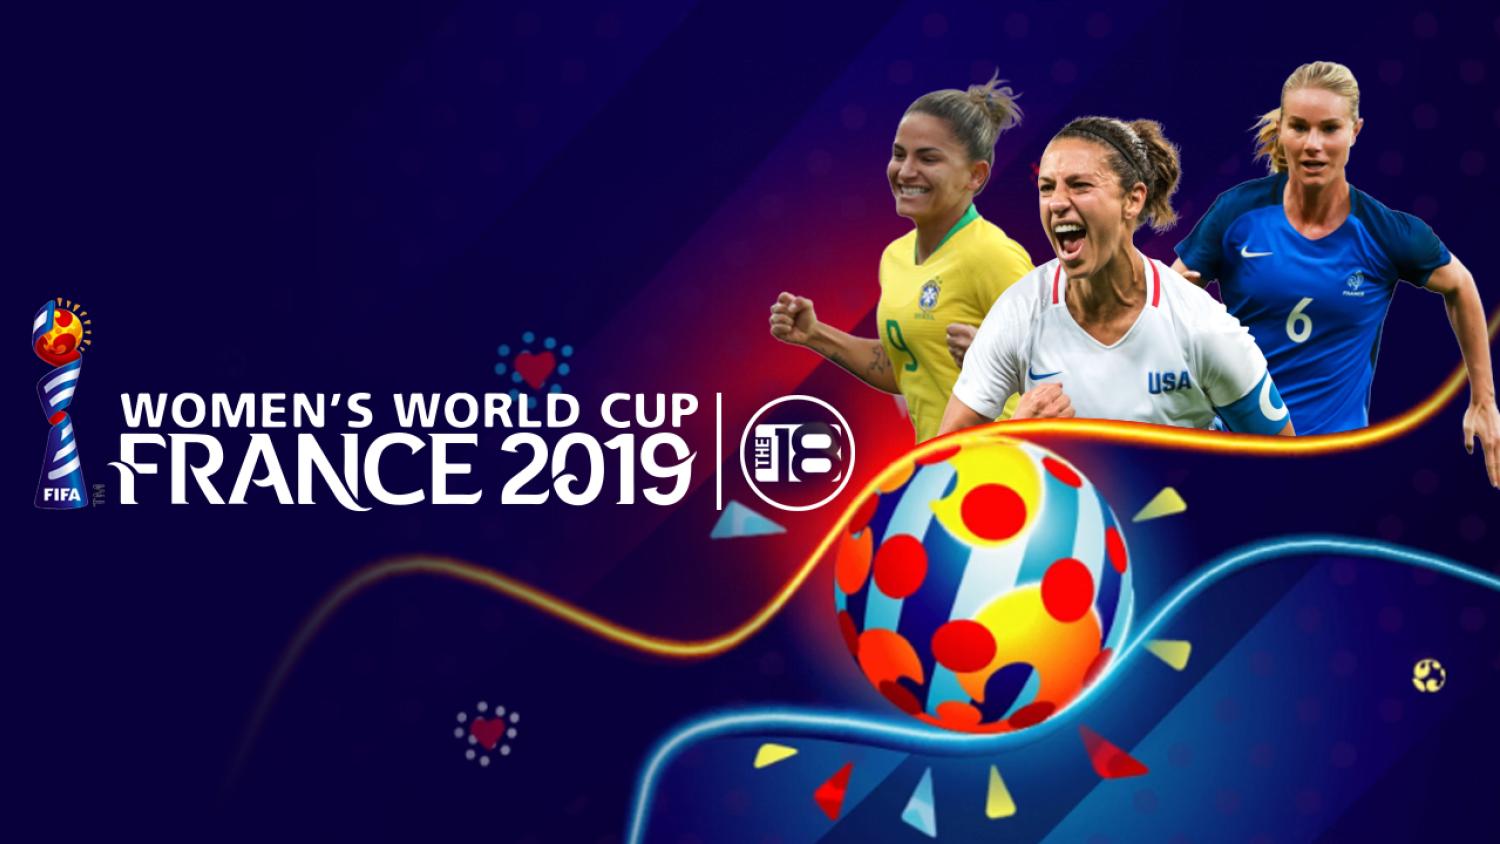 How To Watch Womens World Cup 2019 In The U.S.